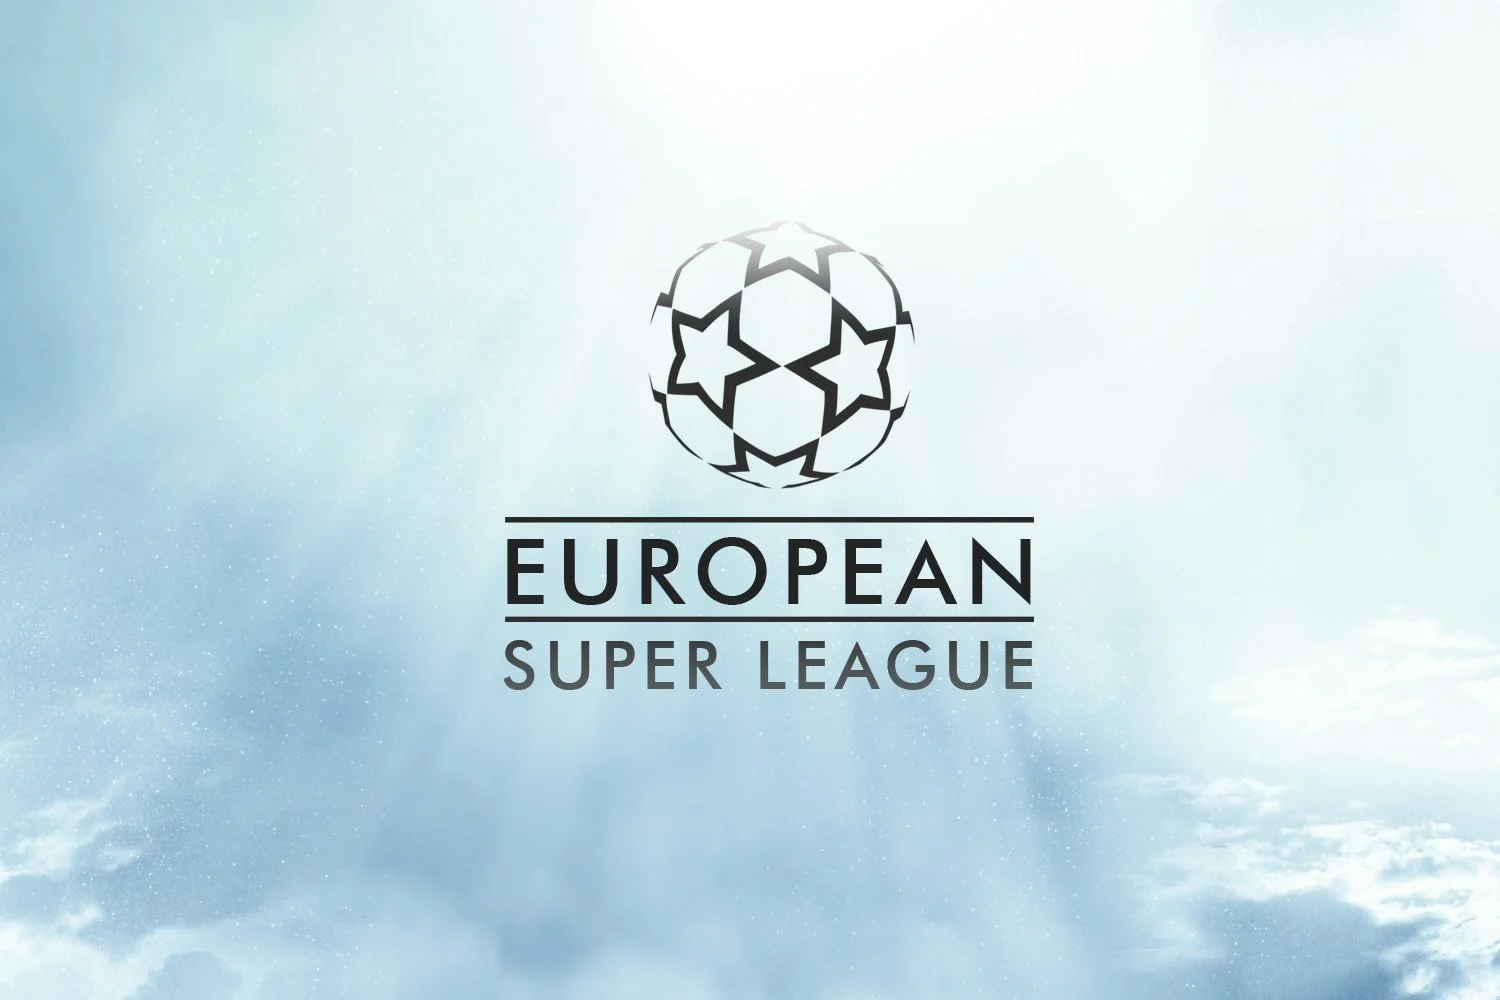 Prize money revealed for the winner of a potential European Super League